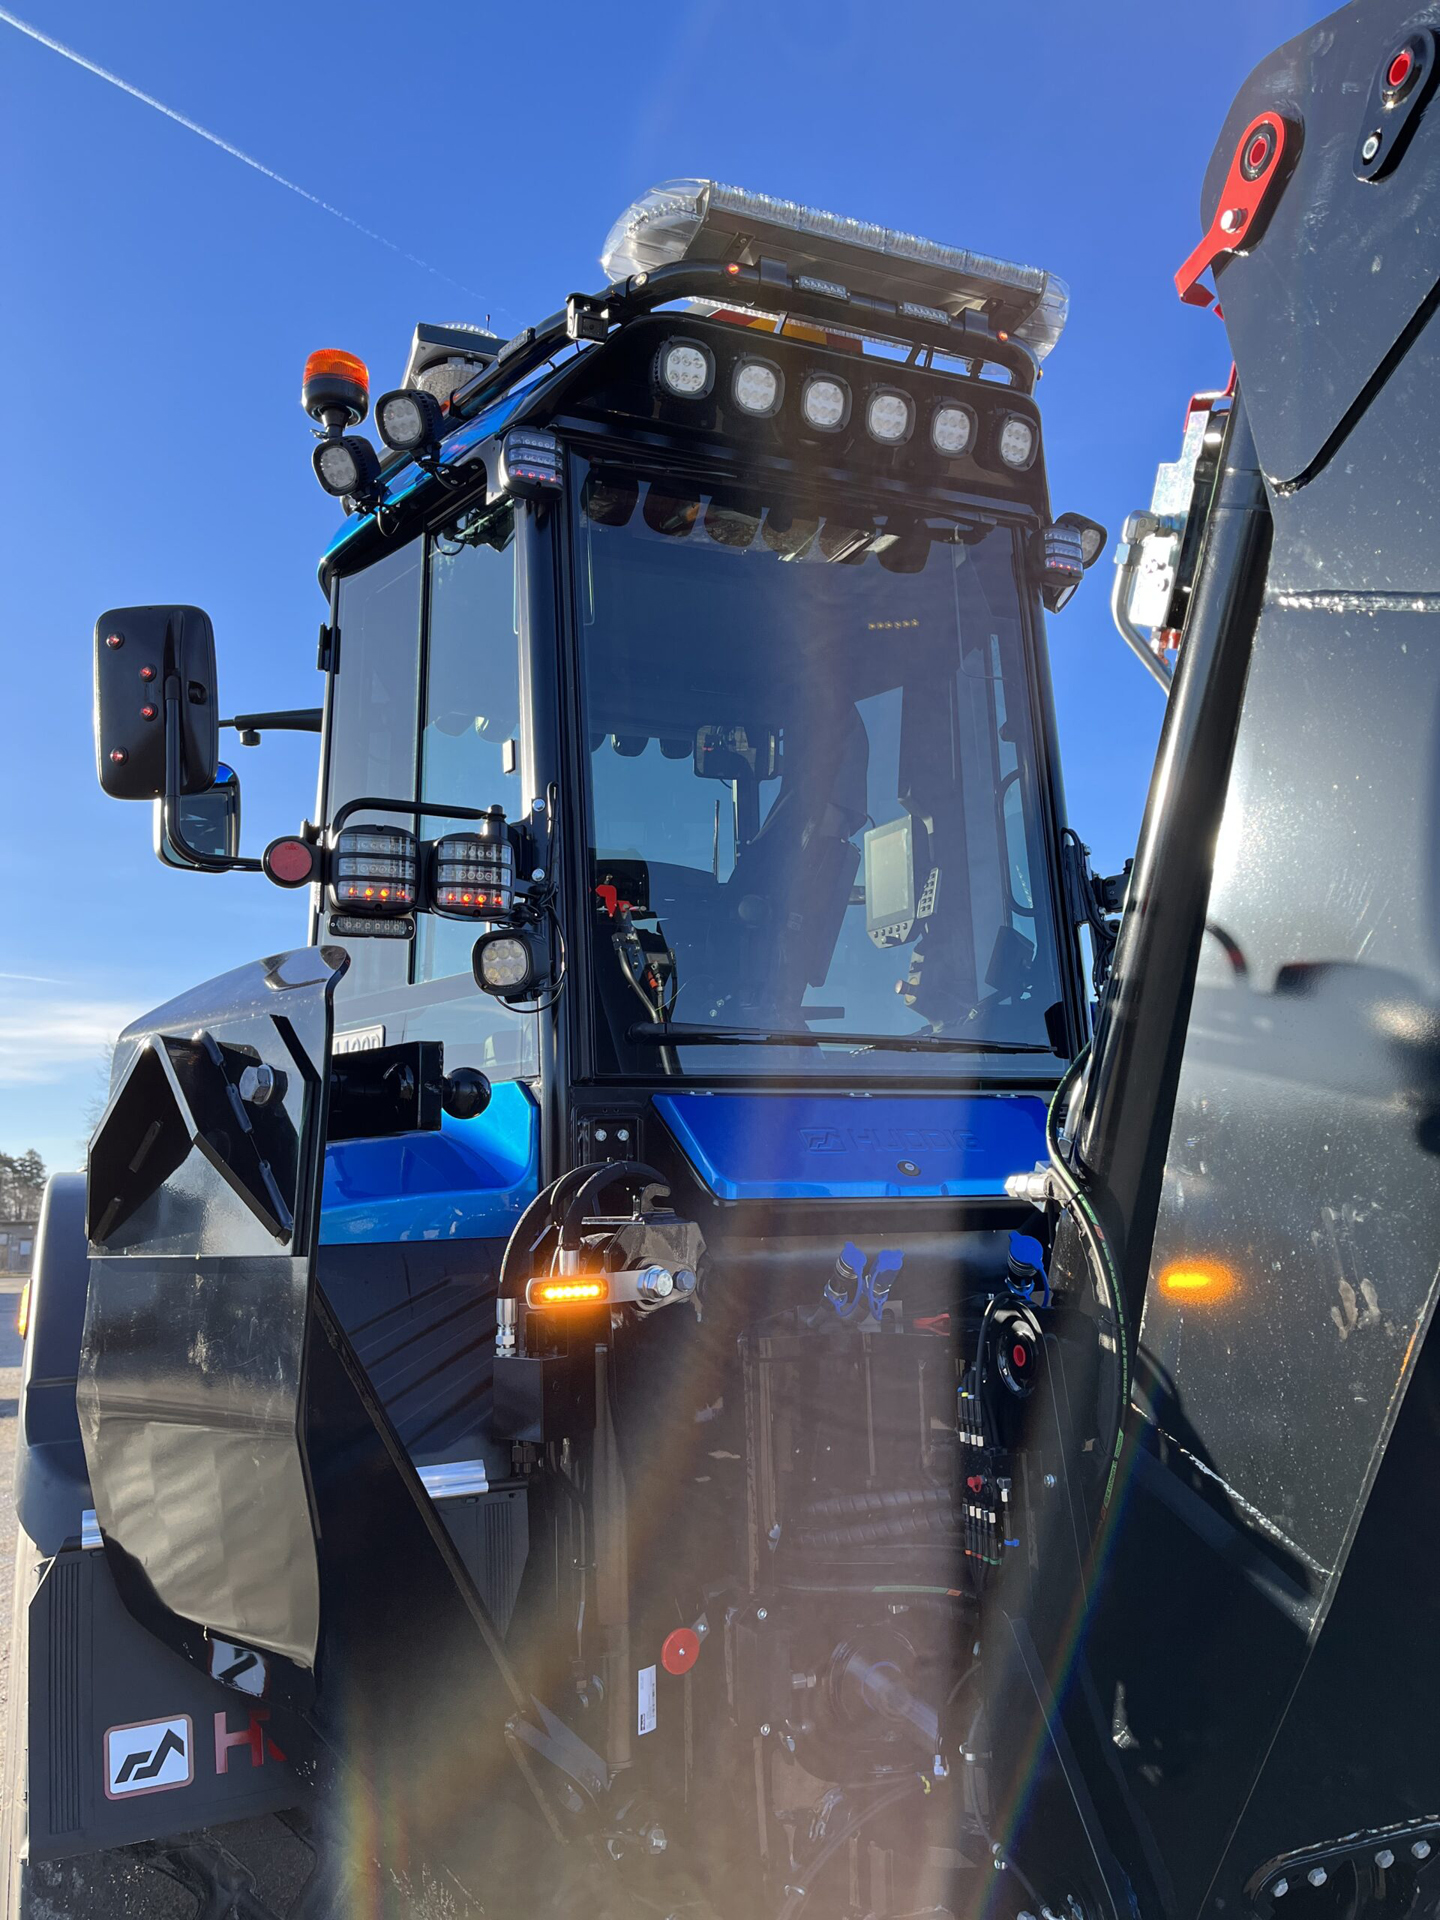 Closely Cropped Angle Shot of Blue Excavator Cab with Amber LED Modules and Unlit Lightbar Against Blue Sky Background